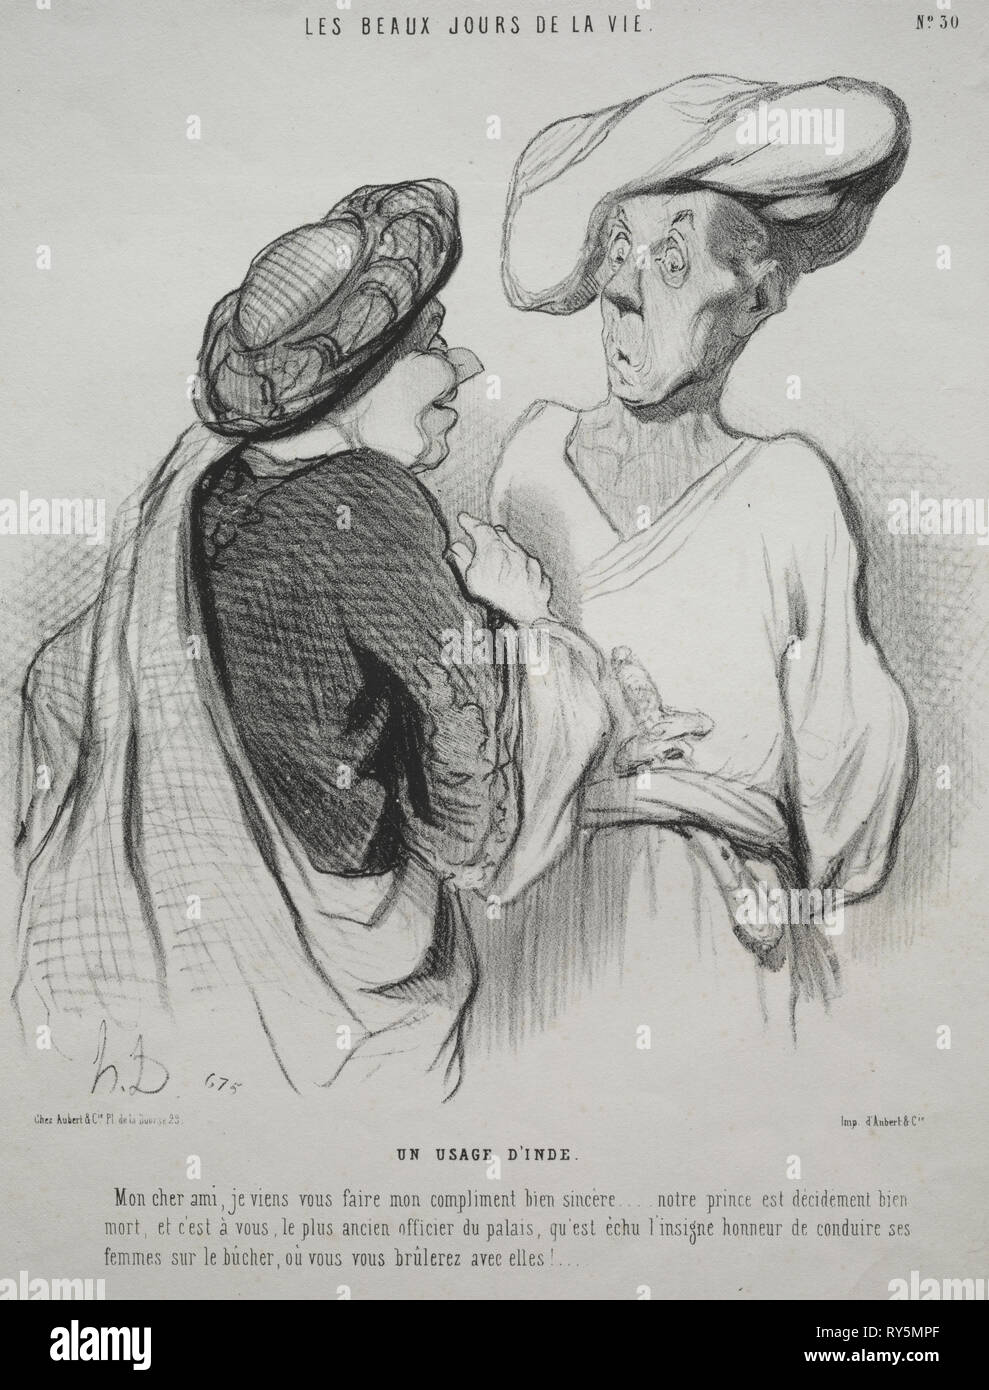 published in le Charivari (no du 9 novembre 1844): The Beautiful Days of Life, plate 30: An Indian Custom, 1844. Honoré Daumier (French, 1808-1879), Aubert. Lithograph; sheet: 31.8 x 22.9 cm (12 1/2 x 9 in Stock Photo